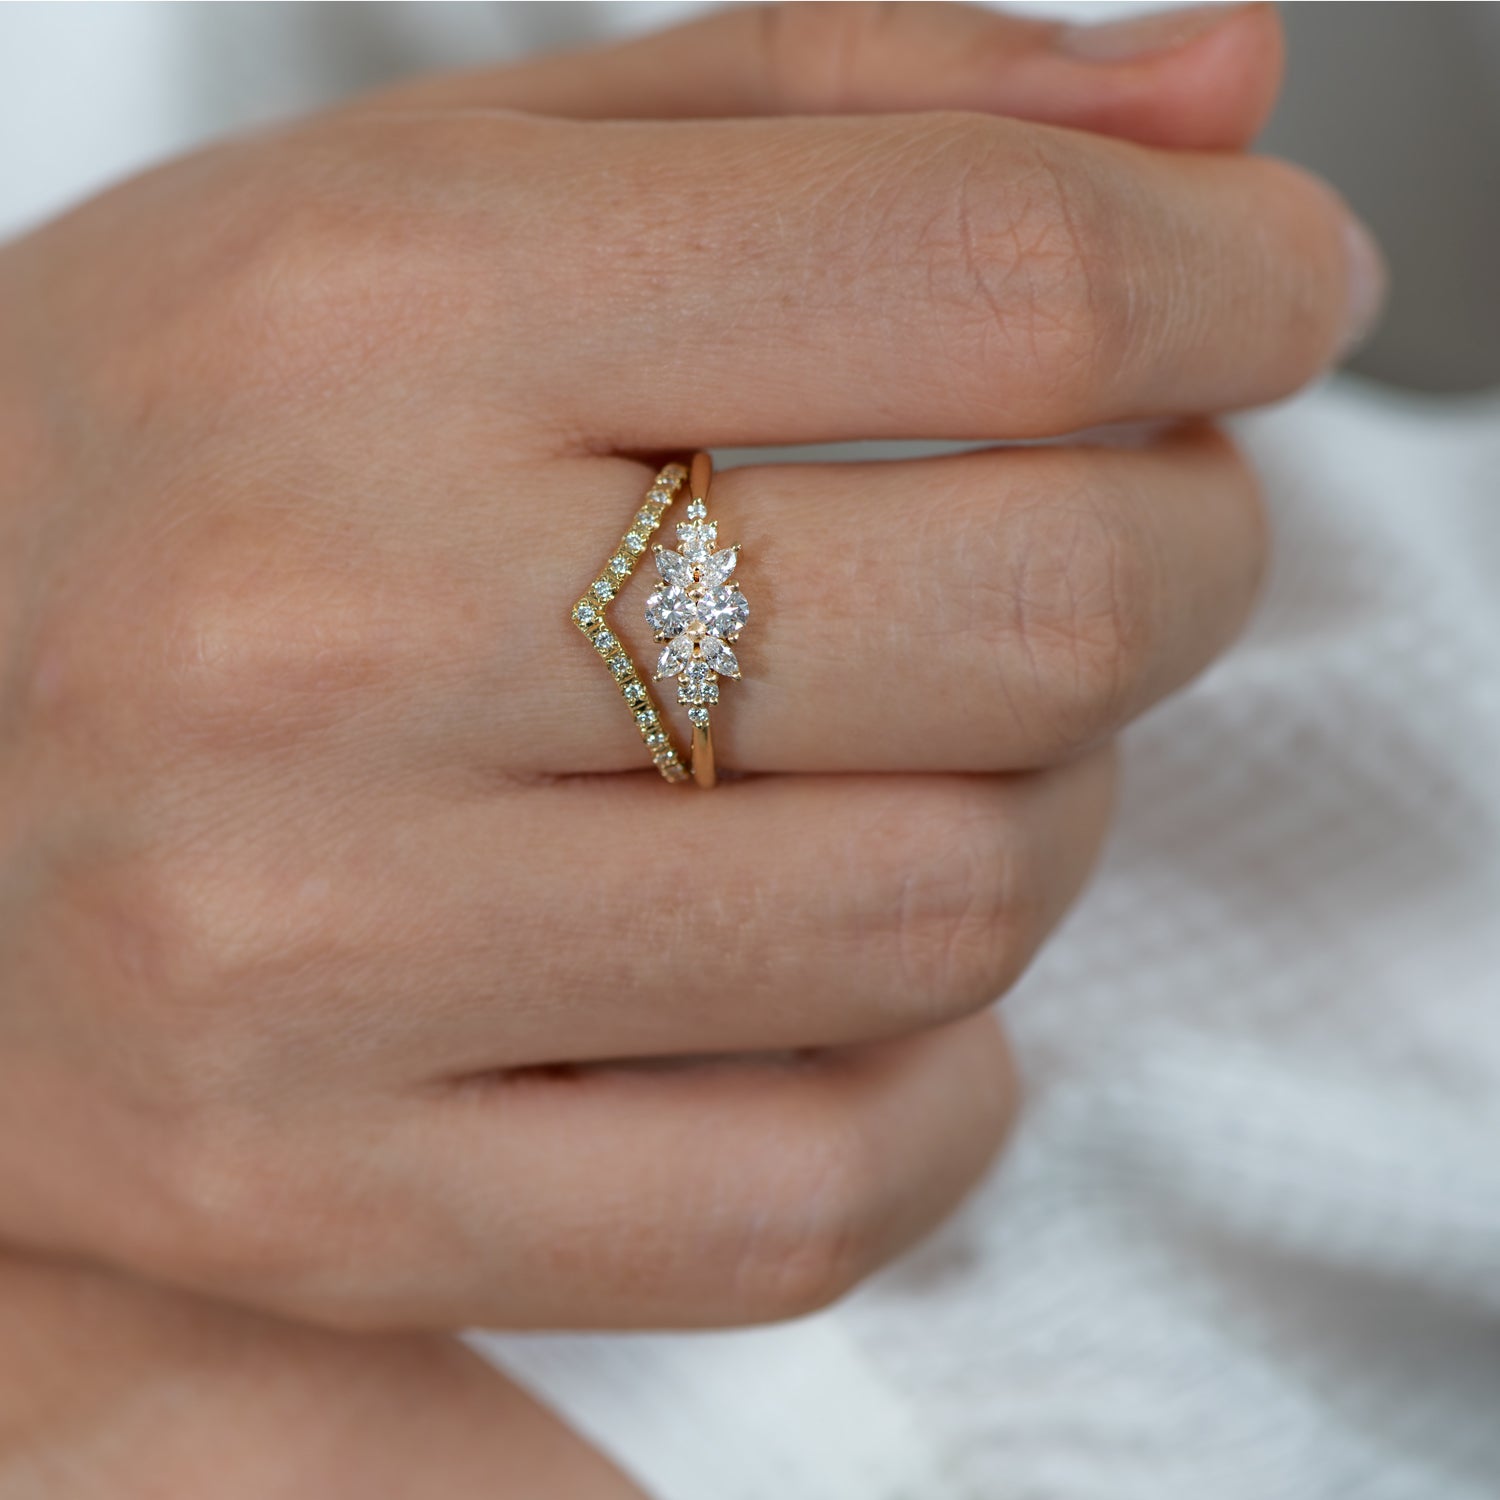 Buy Dainty Diamond Ring, Solid 14K 18K Gold, Tiny Ring, Small Engagement  Ring, Promise Ring, Minimalist Rings, Simple Gold Thin Solitaire Ring  Online in India - Etsy